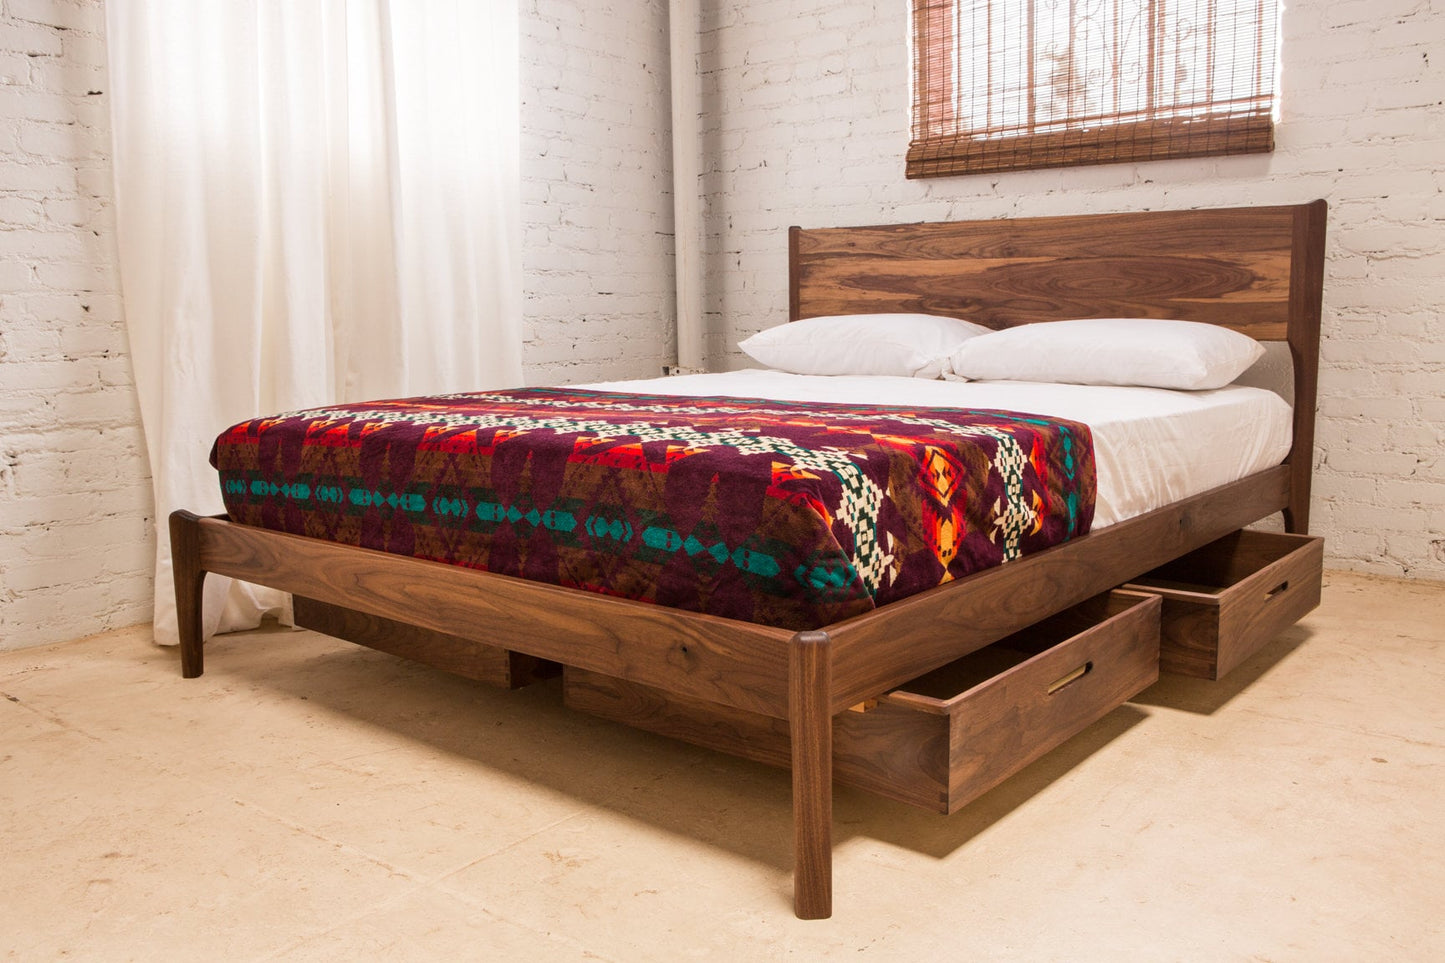 Classic Modern Bed with Storage (Mid Century Danish Modern Style Bed)